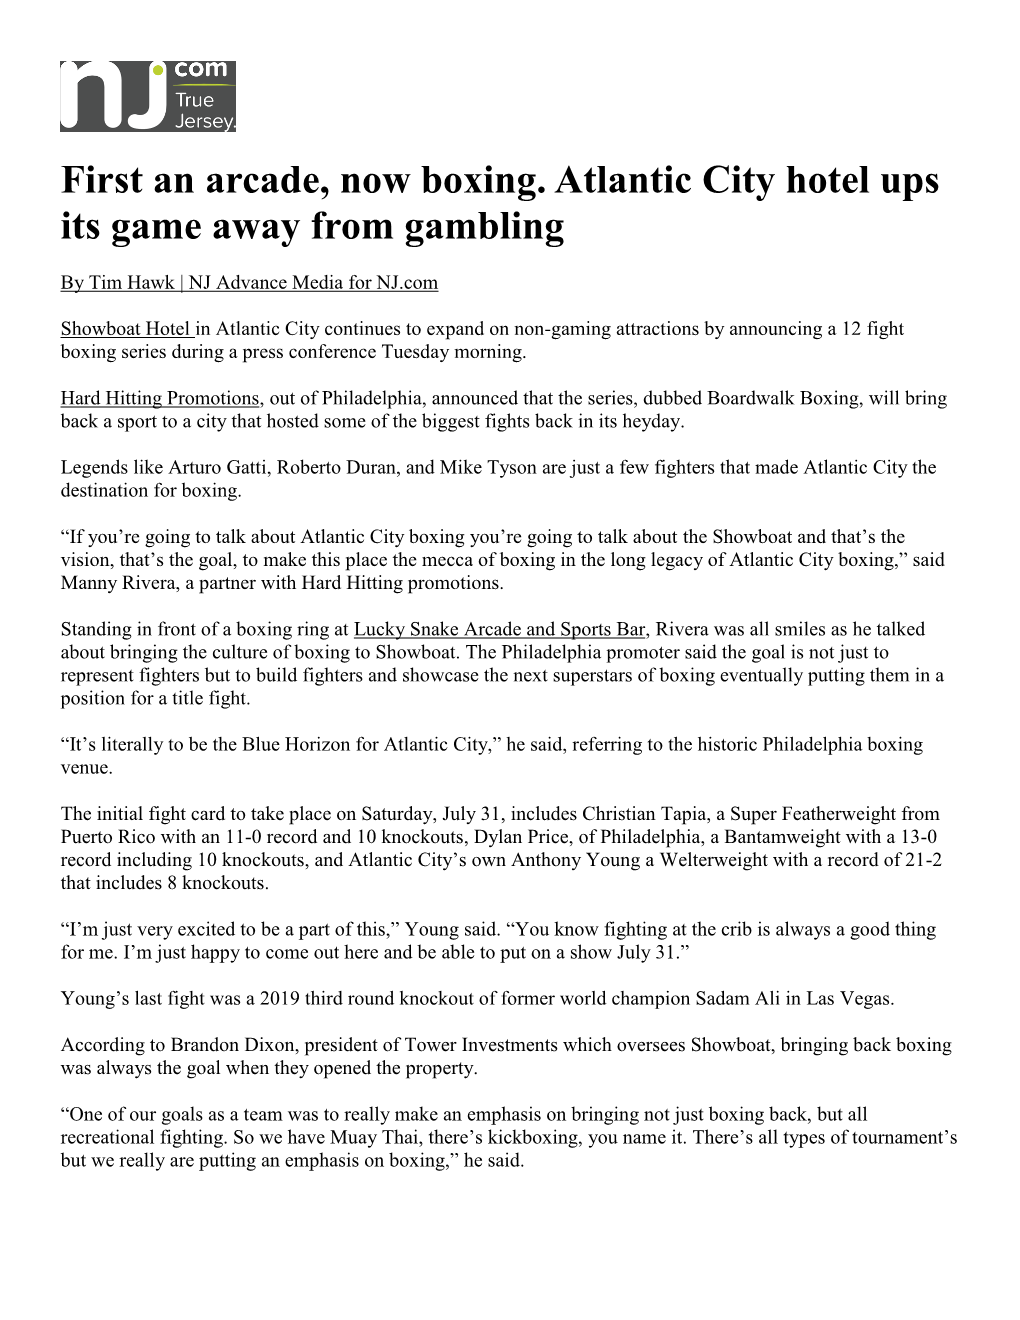 First an Arcade, Now Boxing. Atlantic City Hotel Ups Its Game Away from Gambling